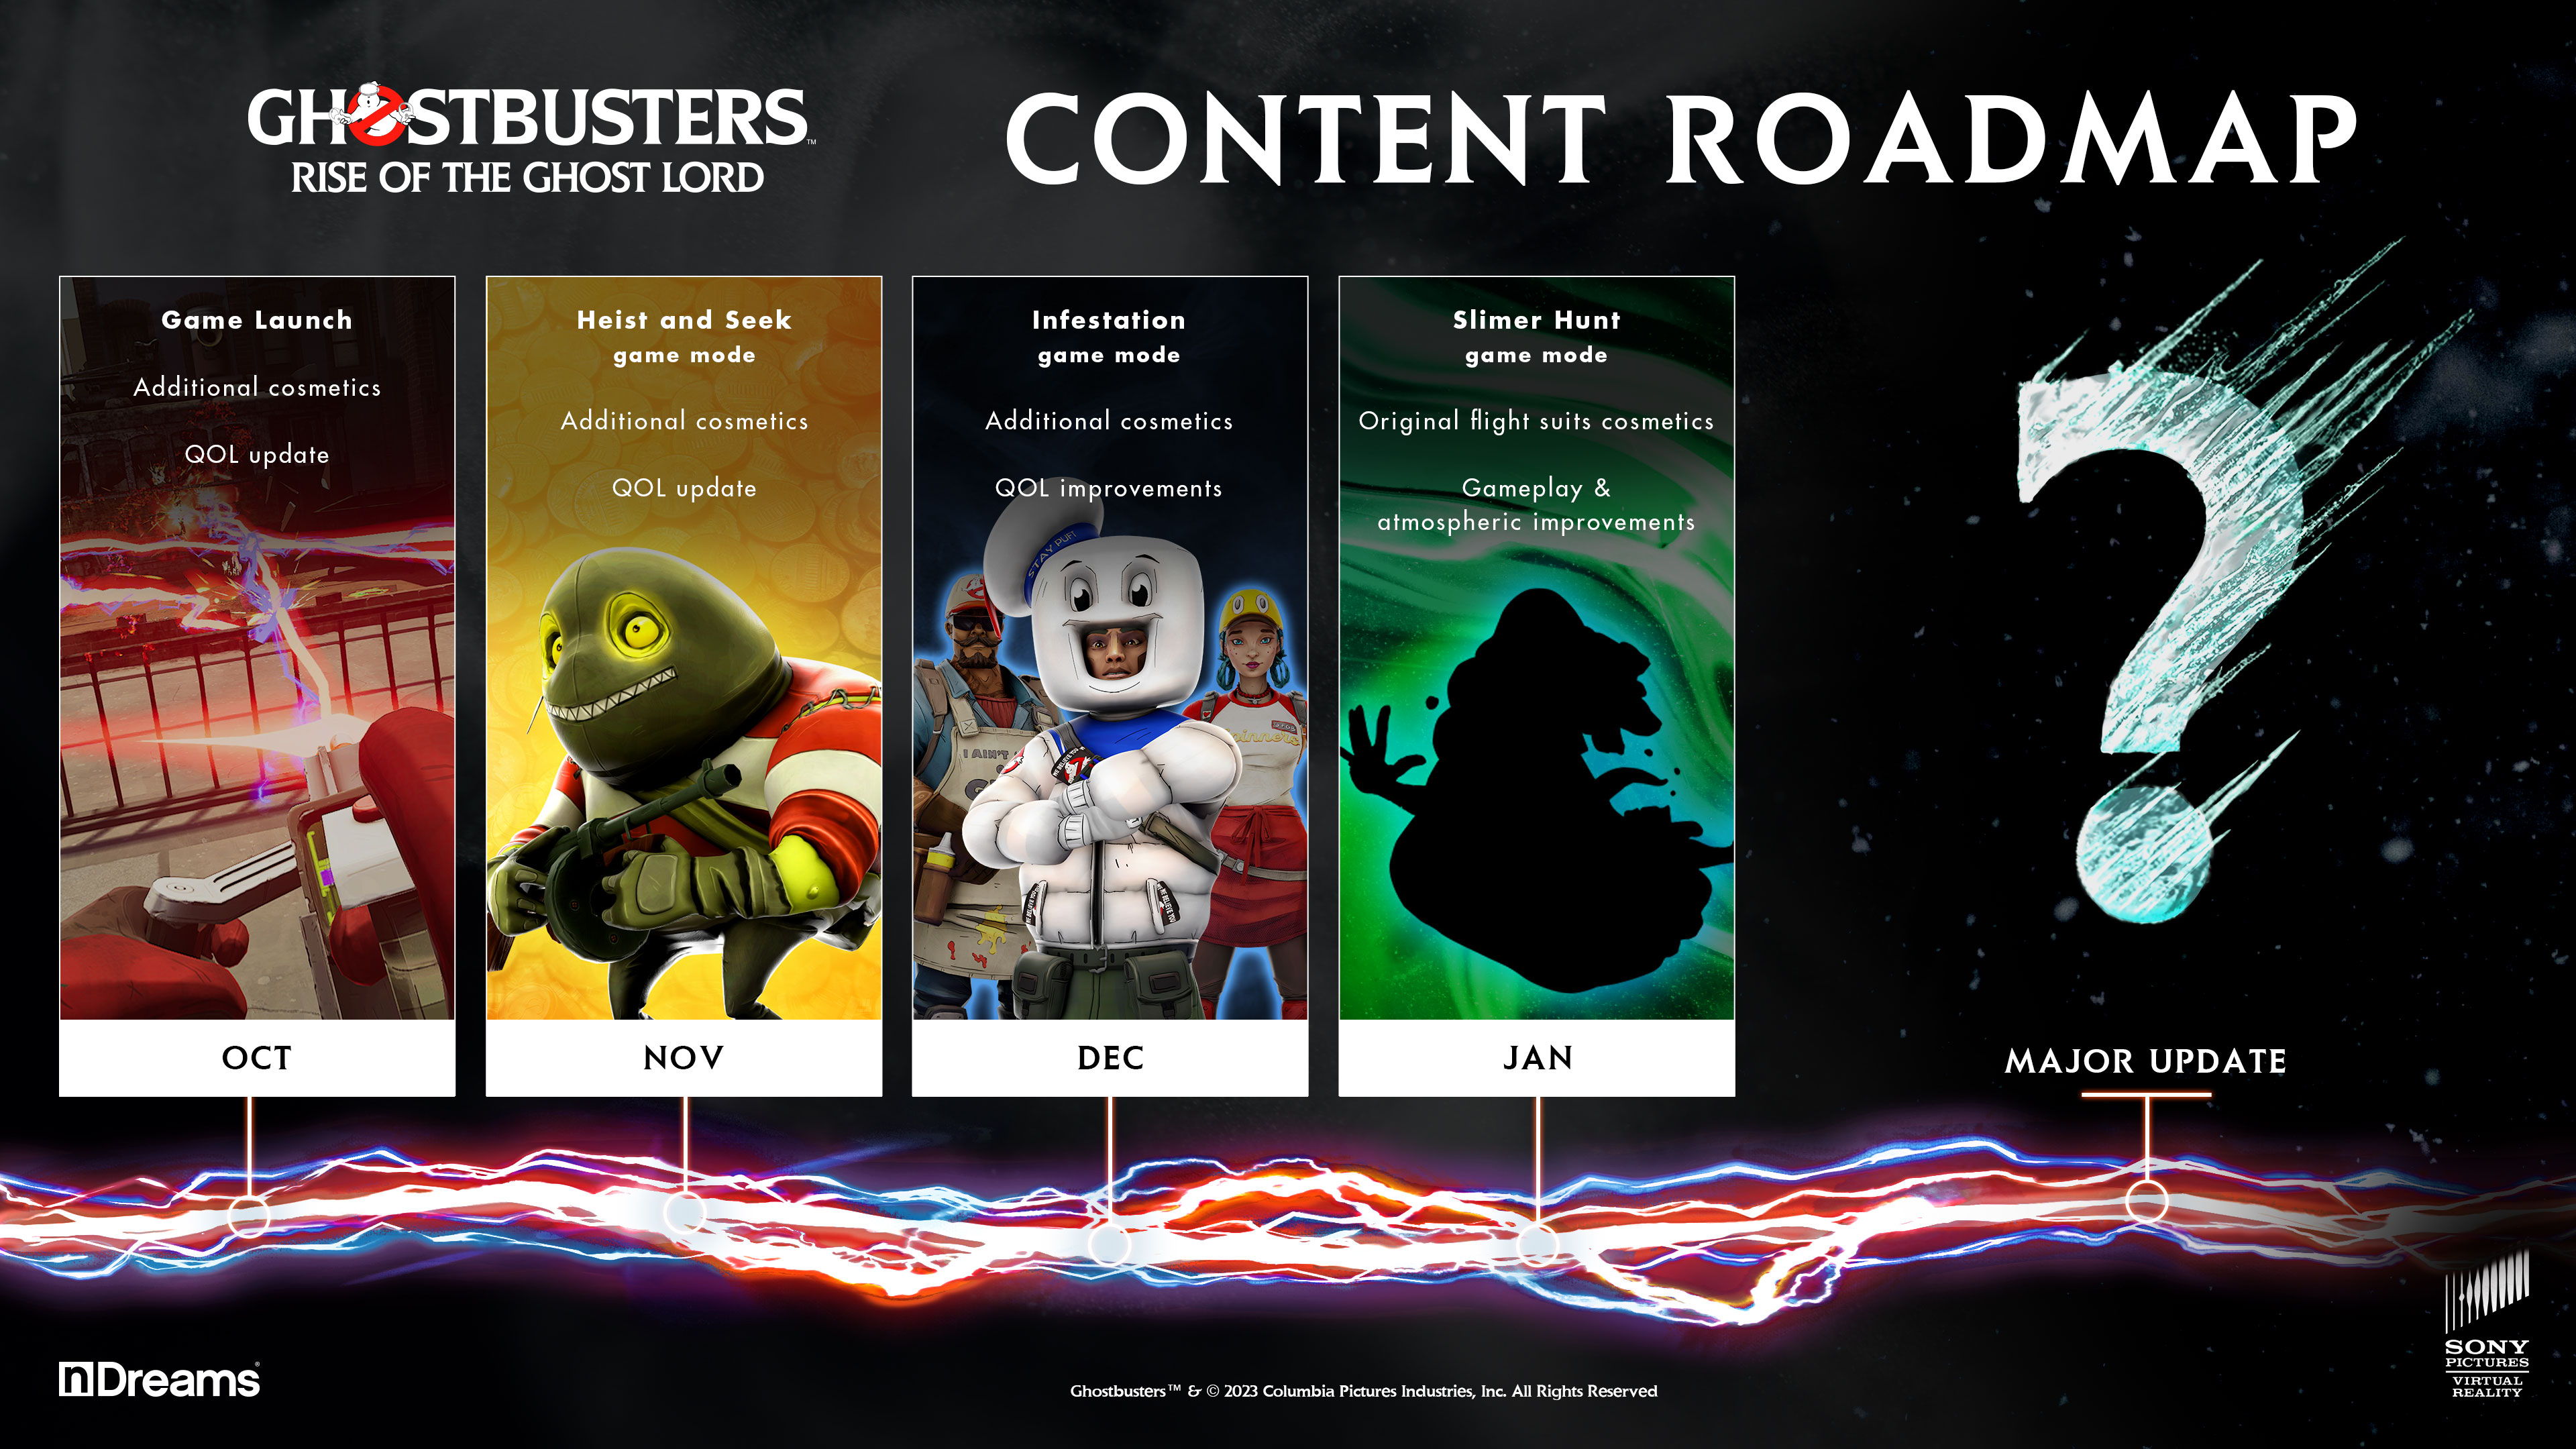 Ghostbusters: Rise of the Ghost Lord post-launch content roadmap